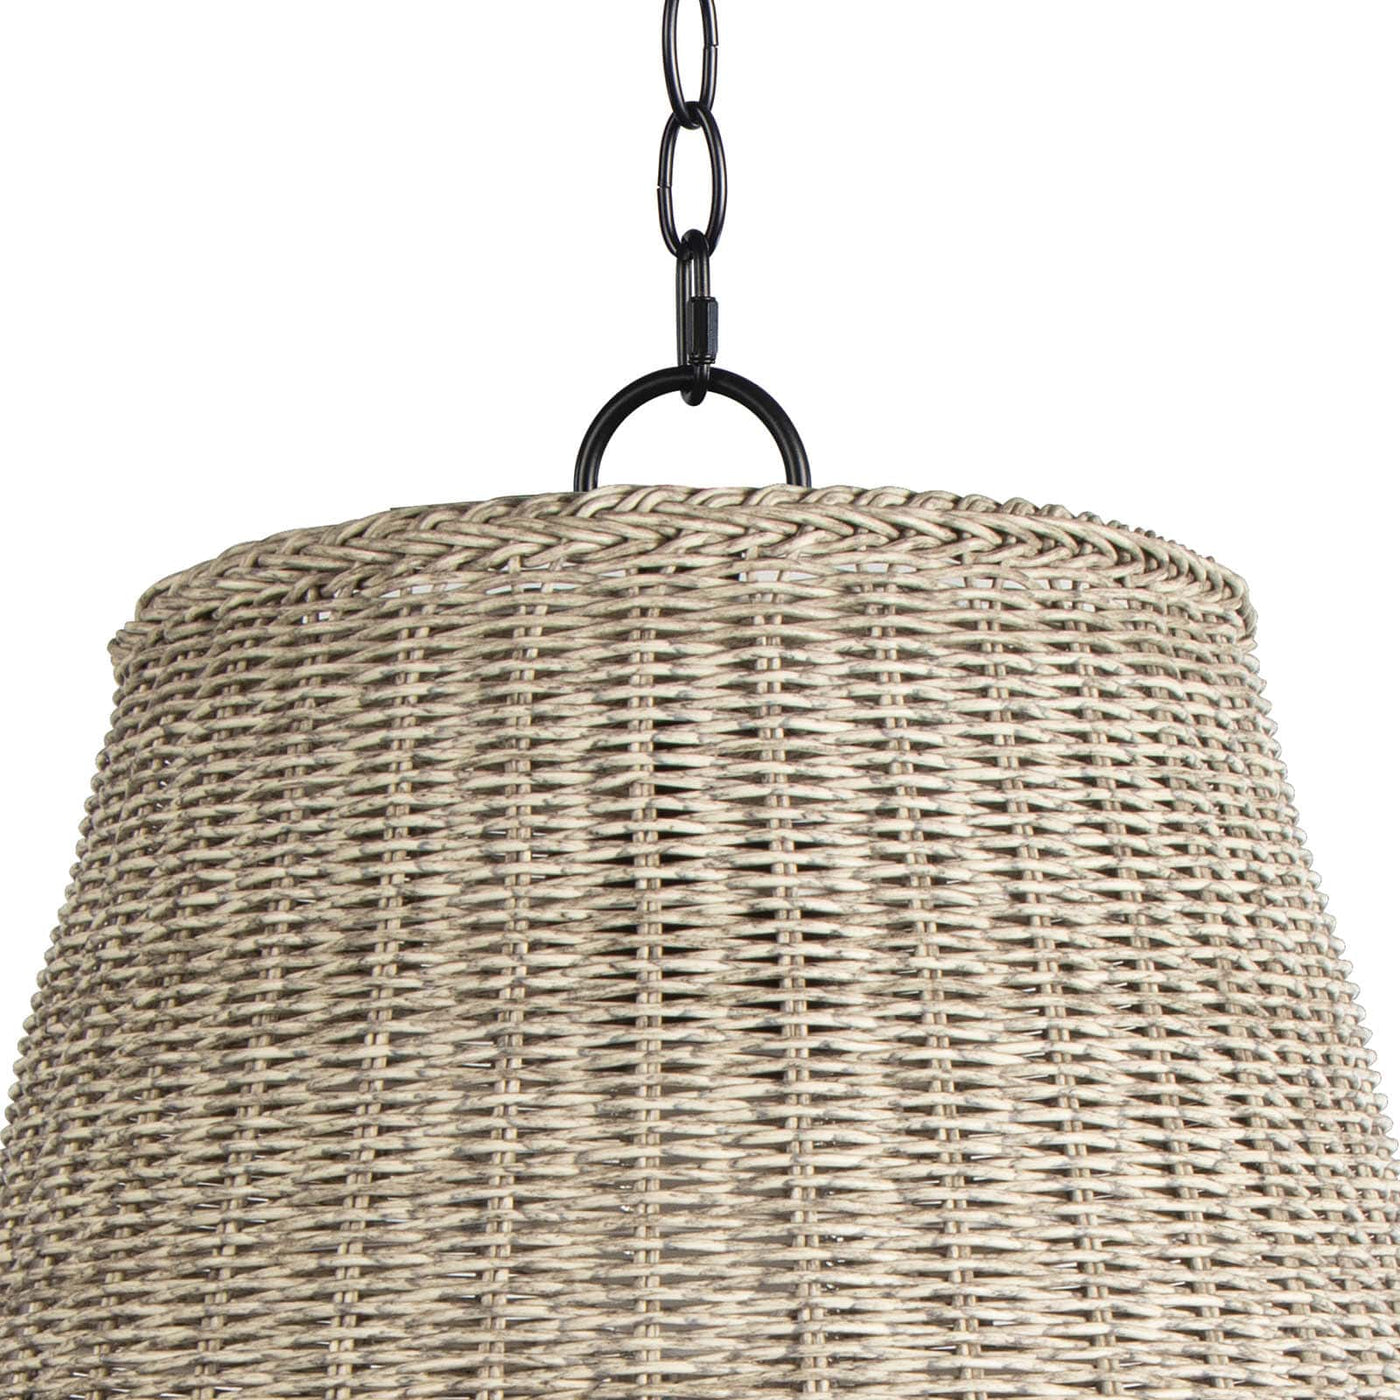 AUGUSTINE OUTDOOR PENDANT BY COASTAL LIVING